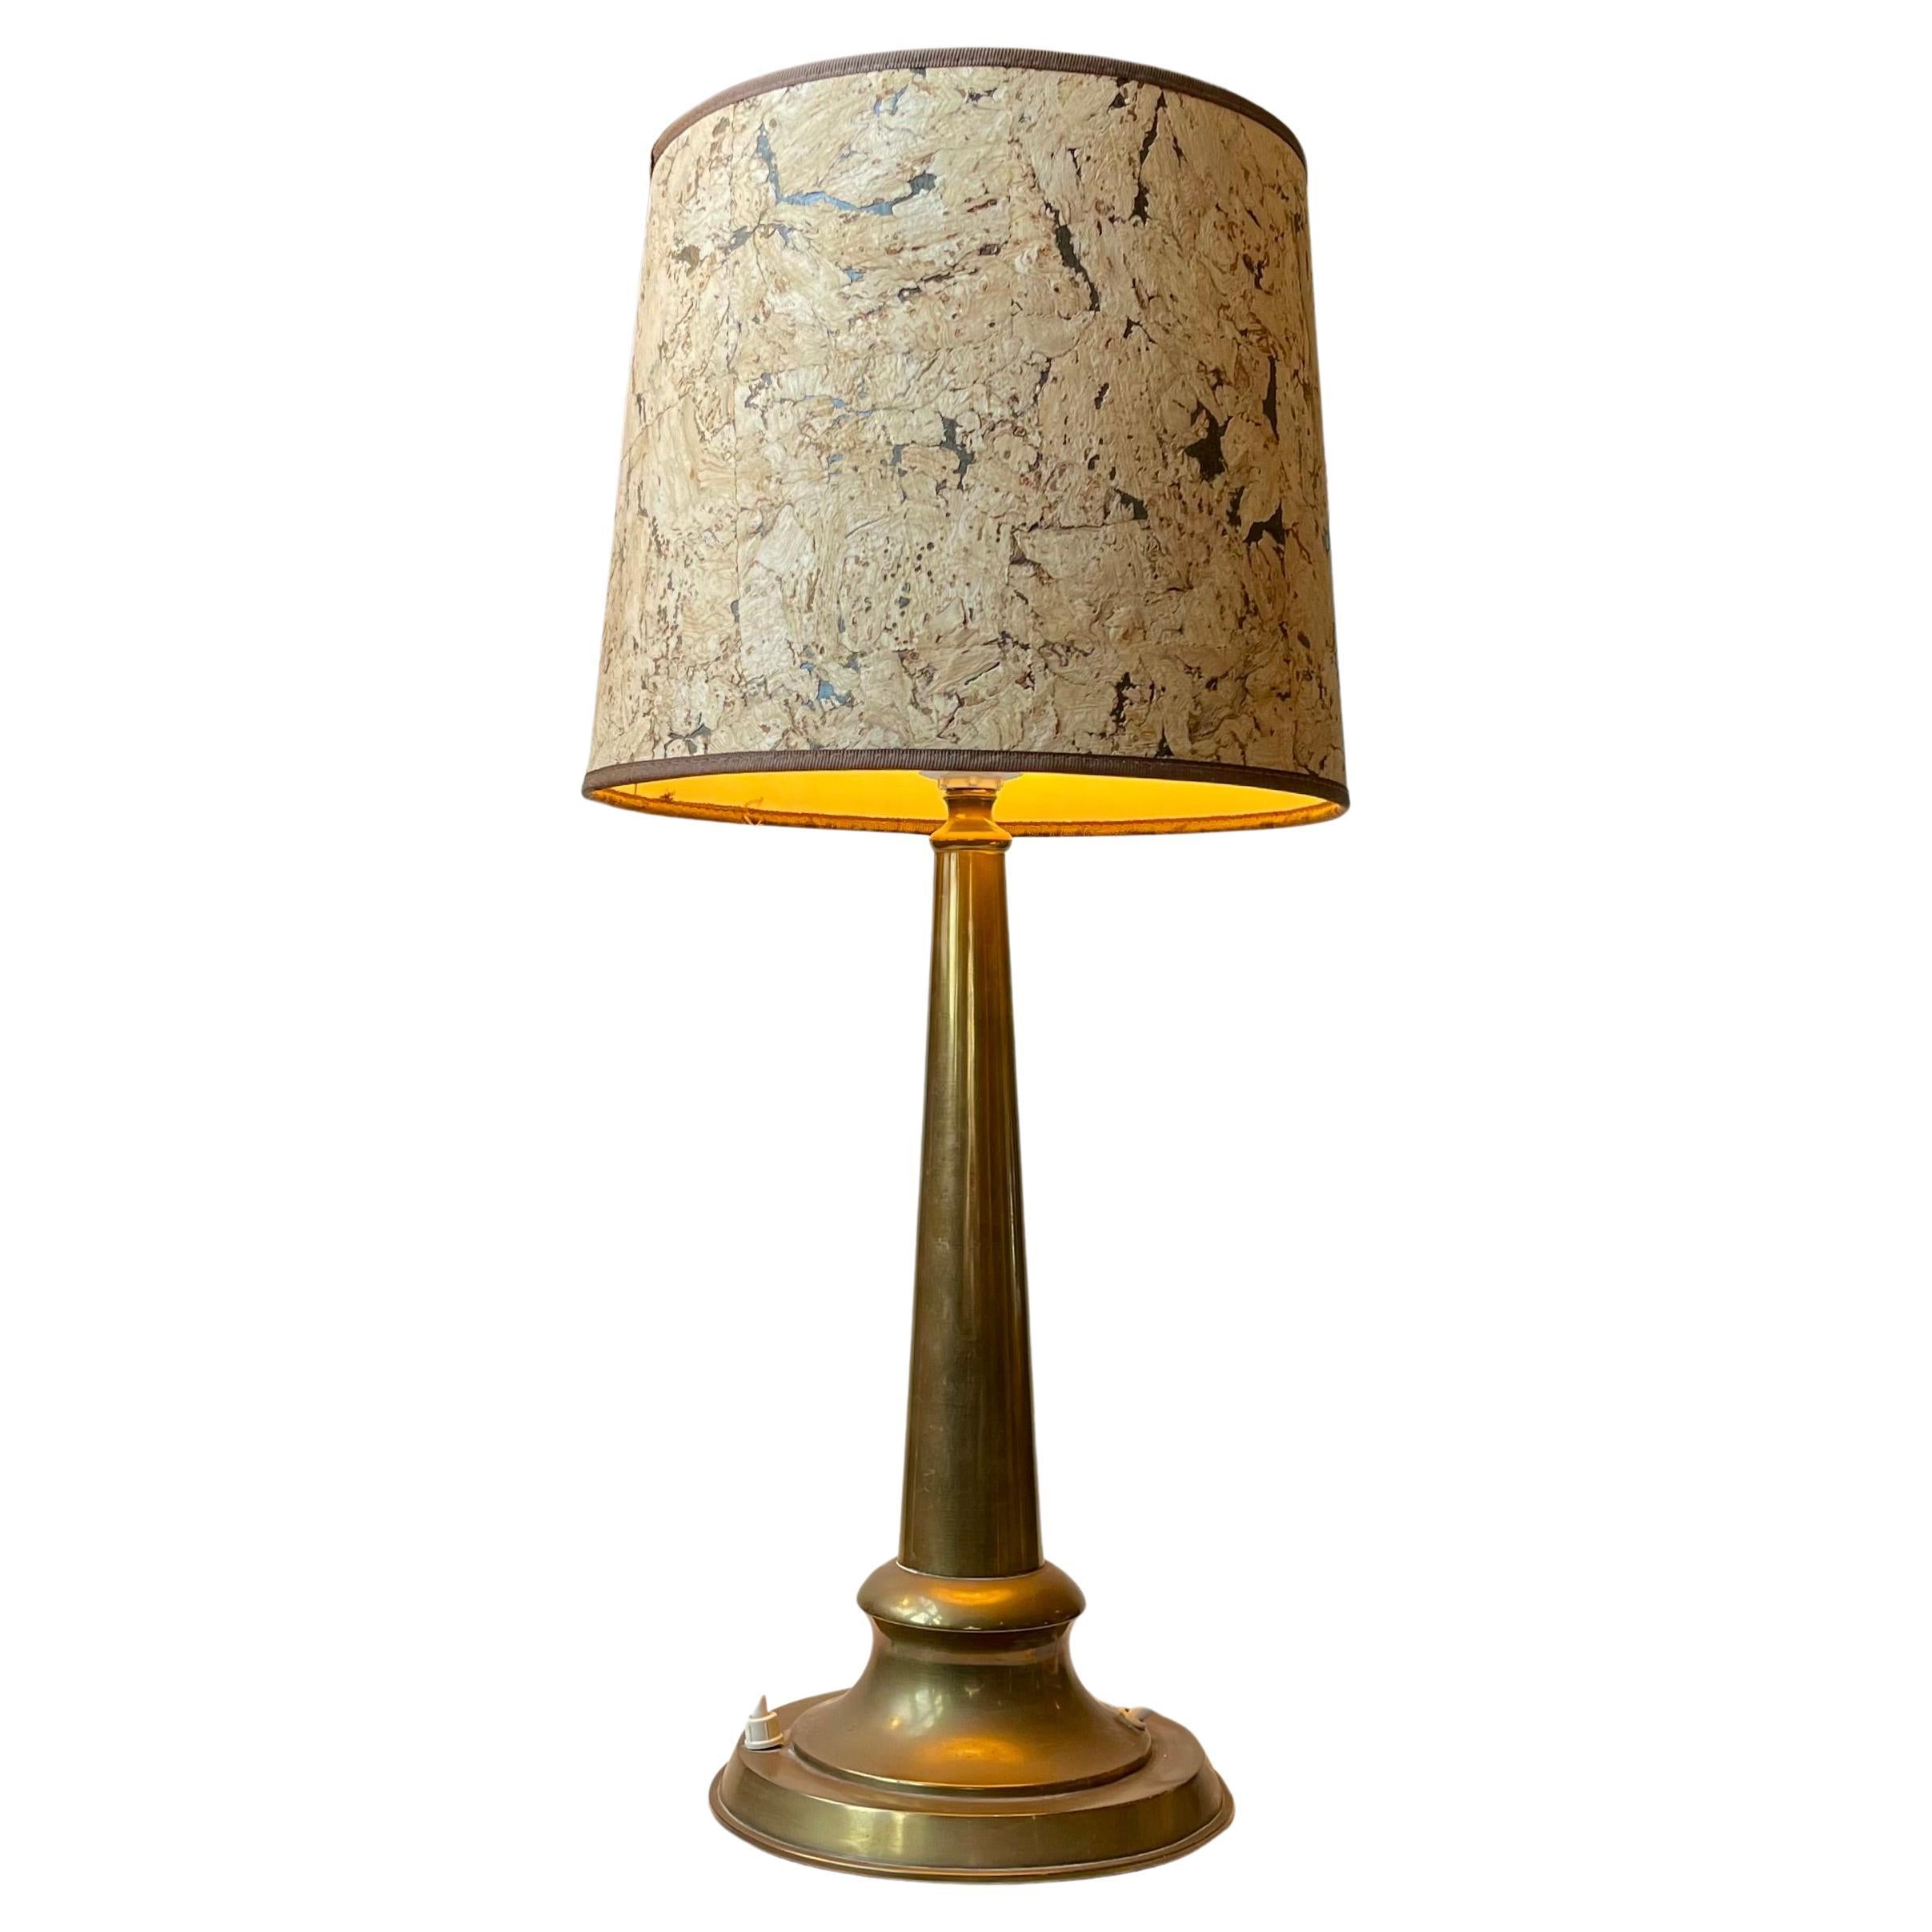 Vintage Scandinavian Brass Column Table Lamp with Cork Shade, 1950s For Sale